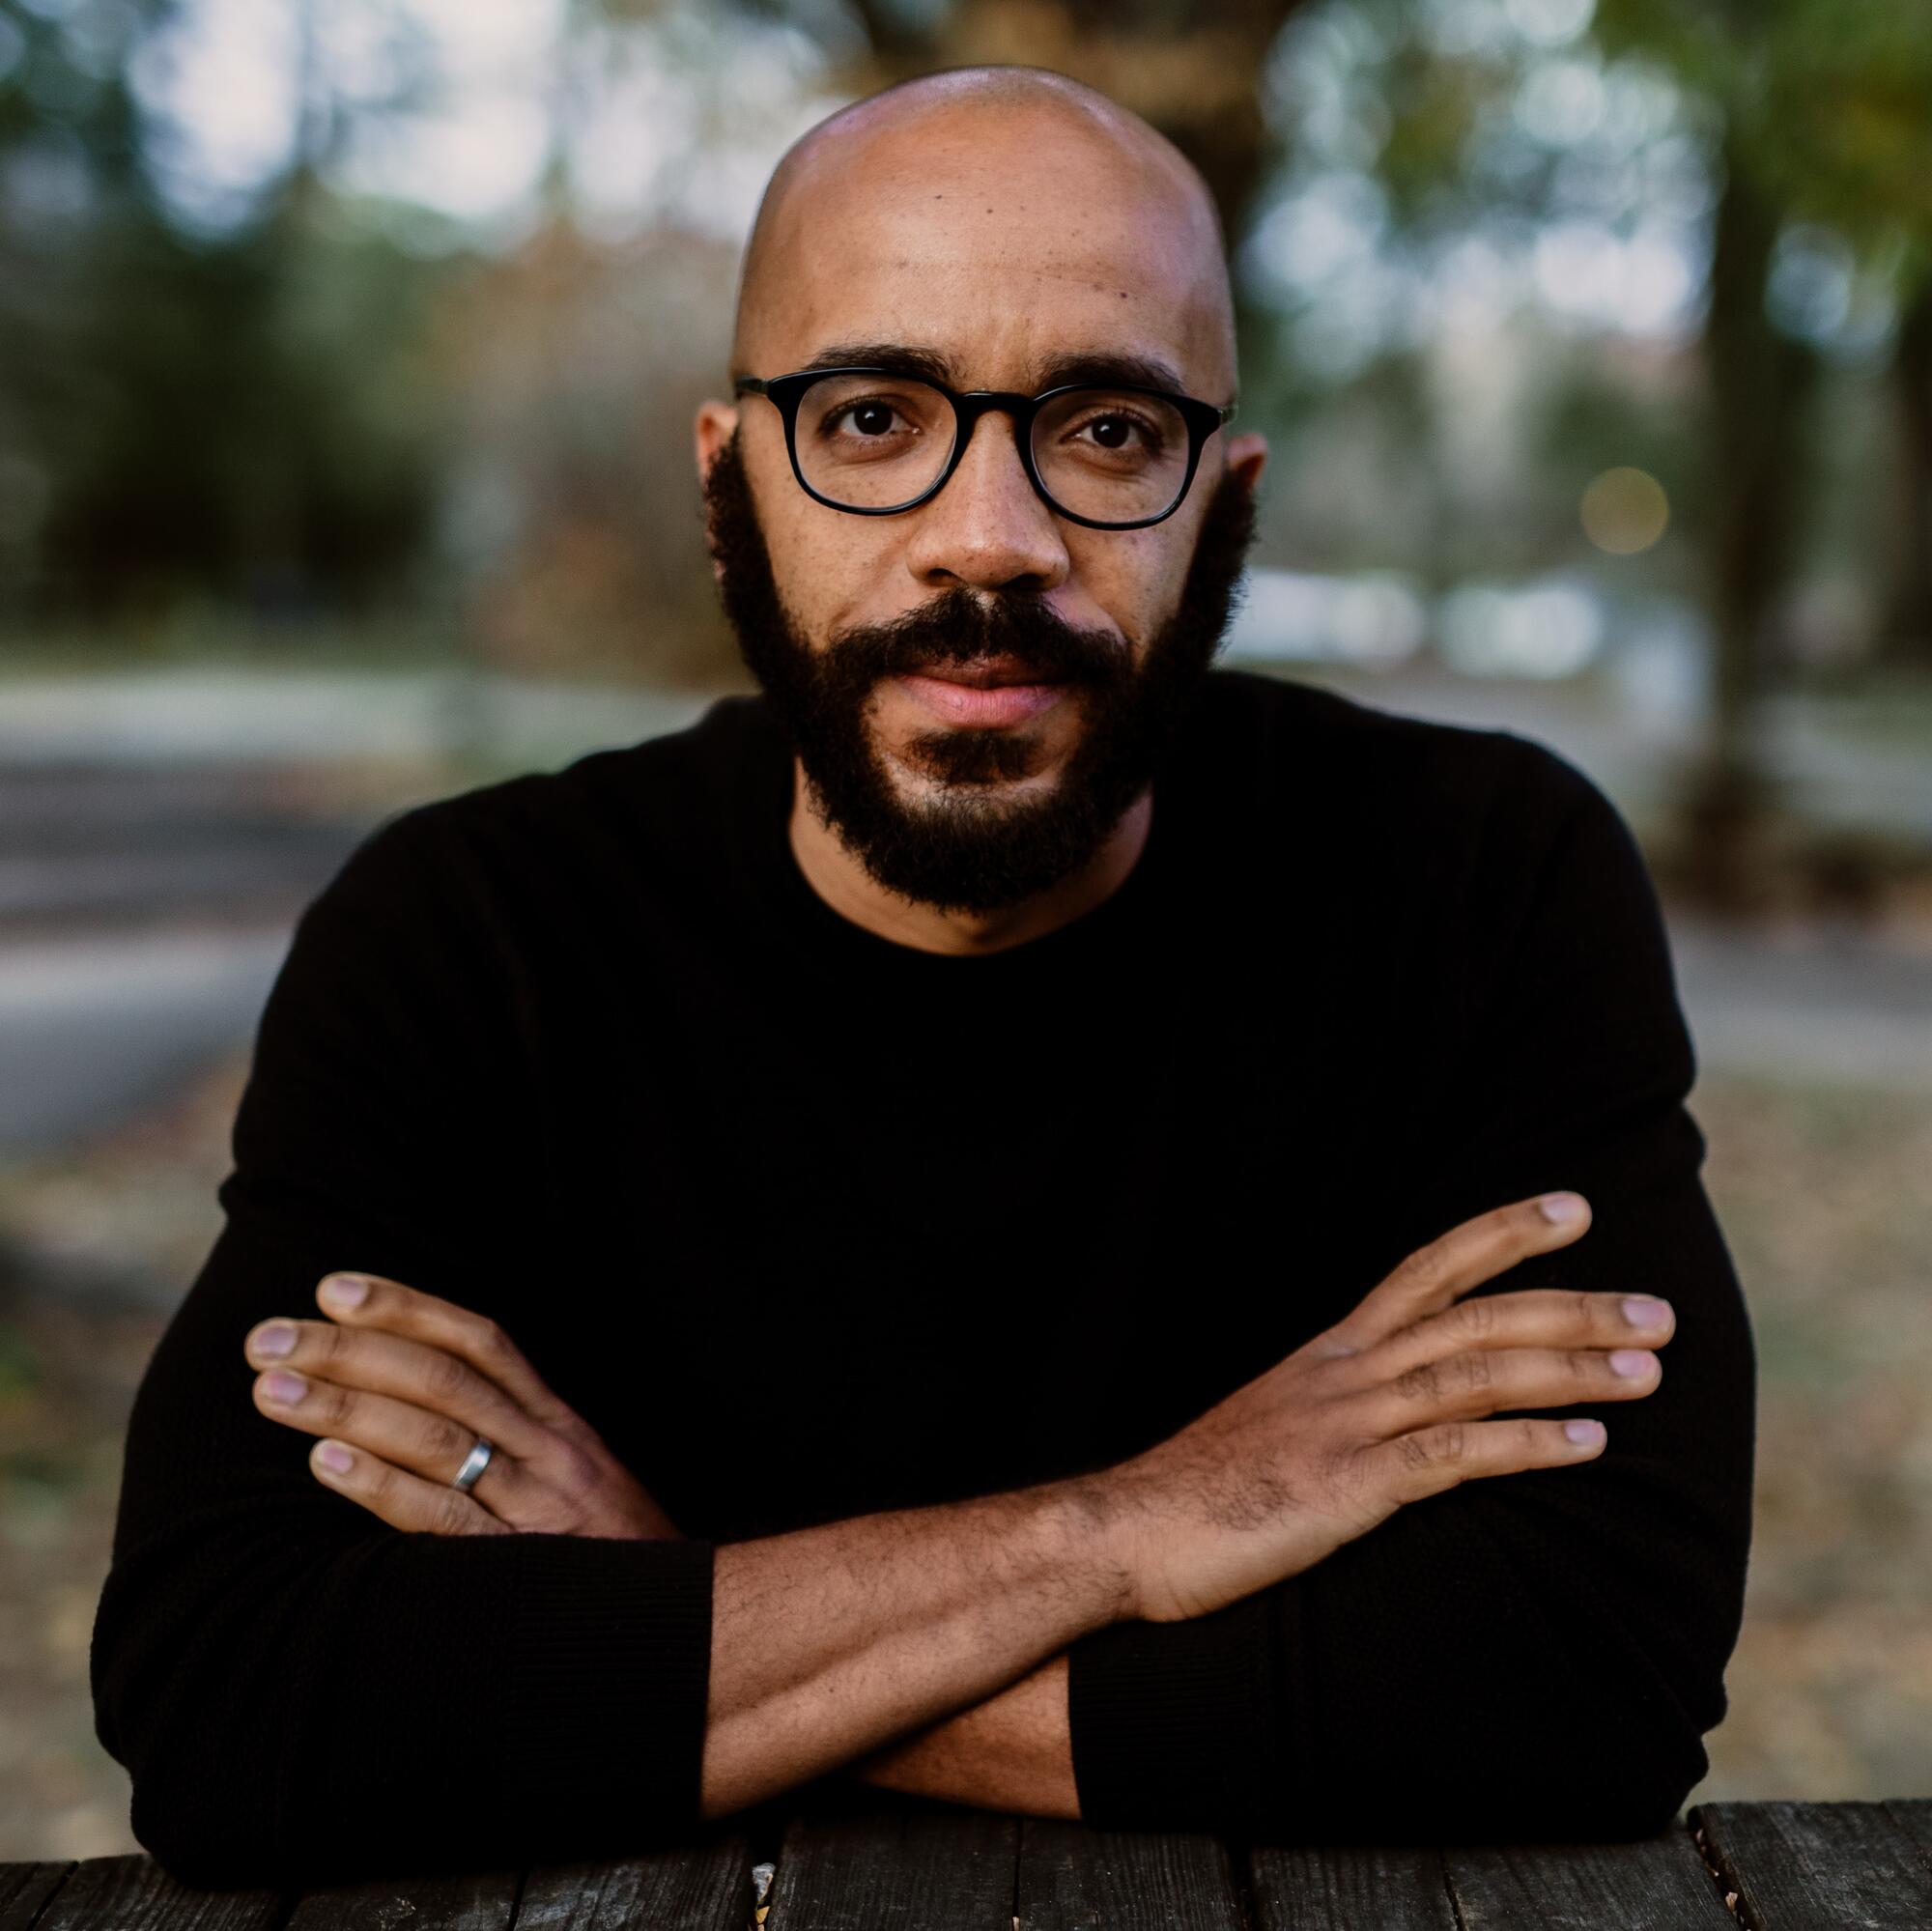 Author Clint Smith in a black sweater, glasses, and full beard